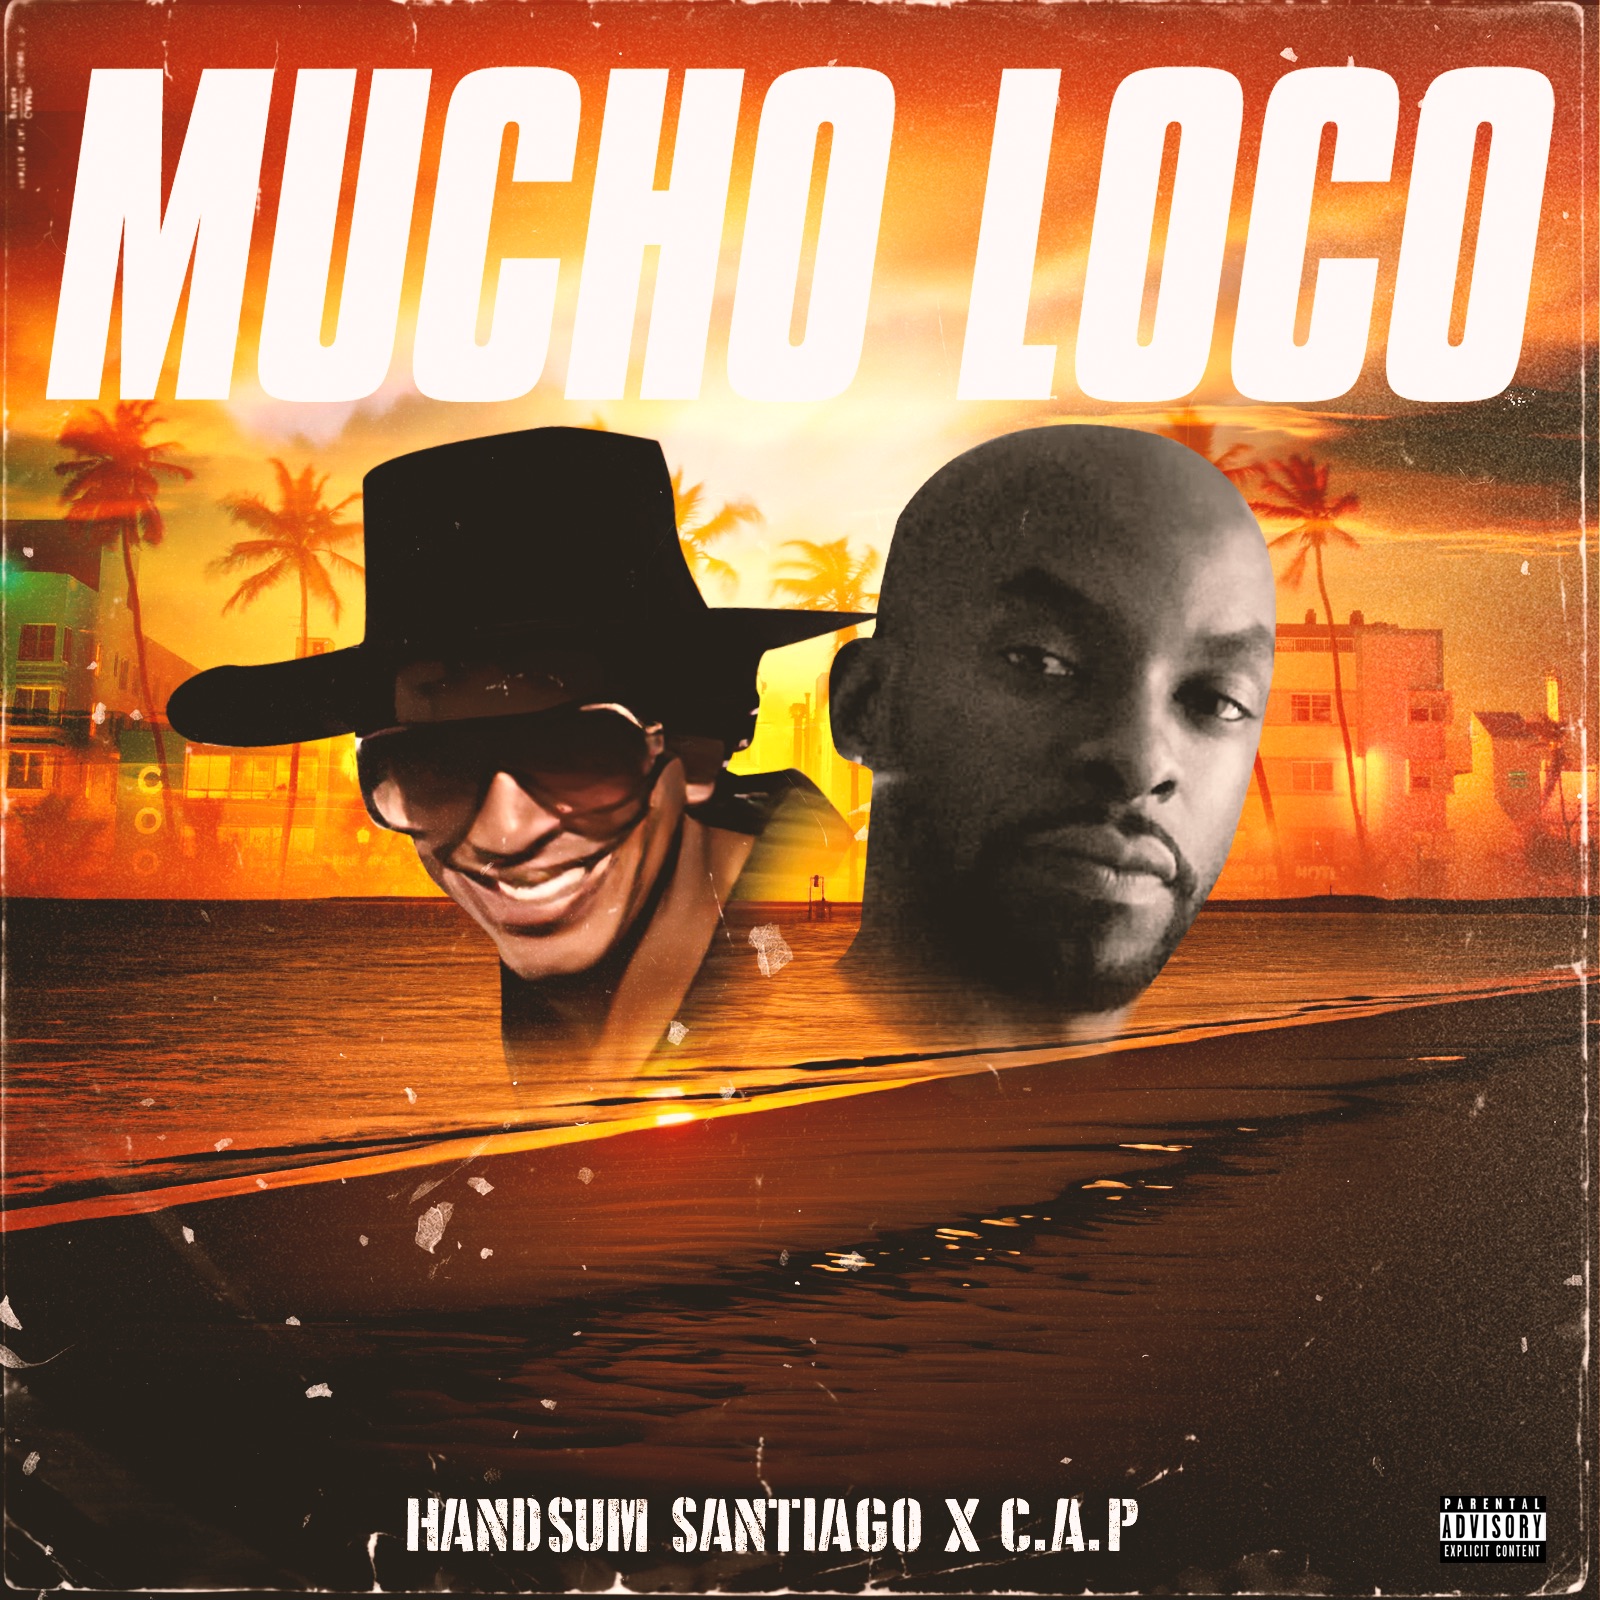 ‘Handsum Santiago’ transcends genres with stunning new single ‘Mucho Loco’ out now.